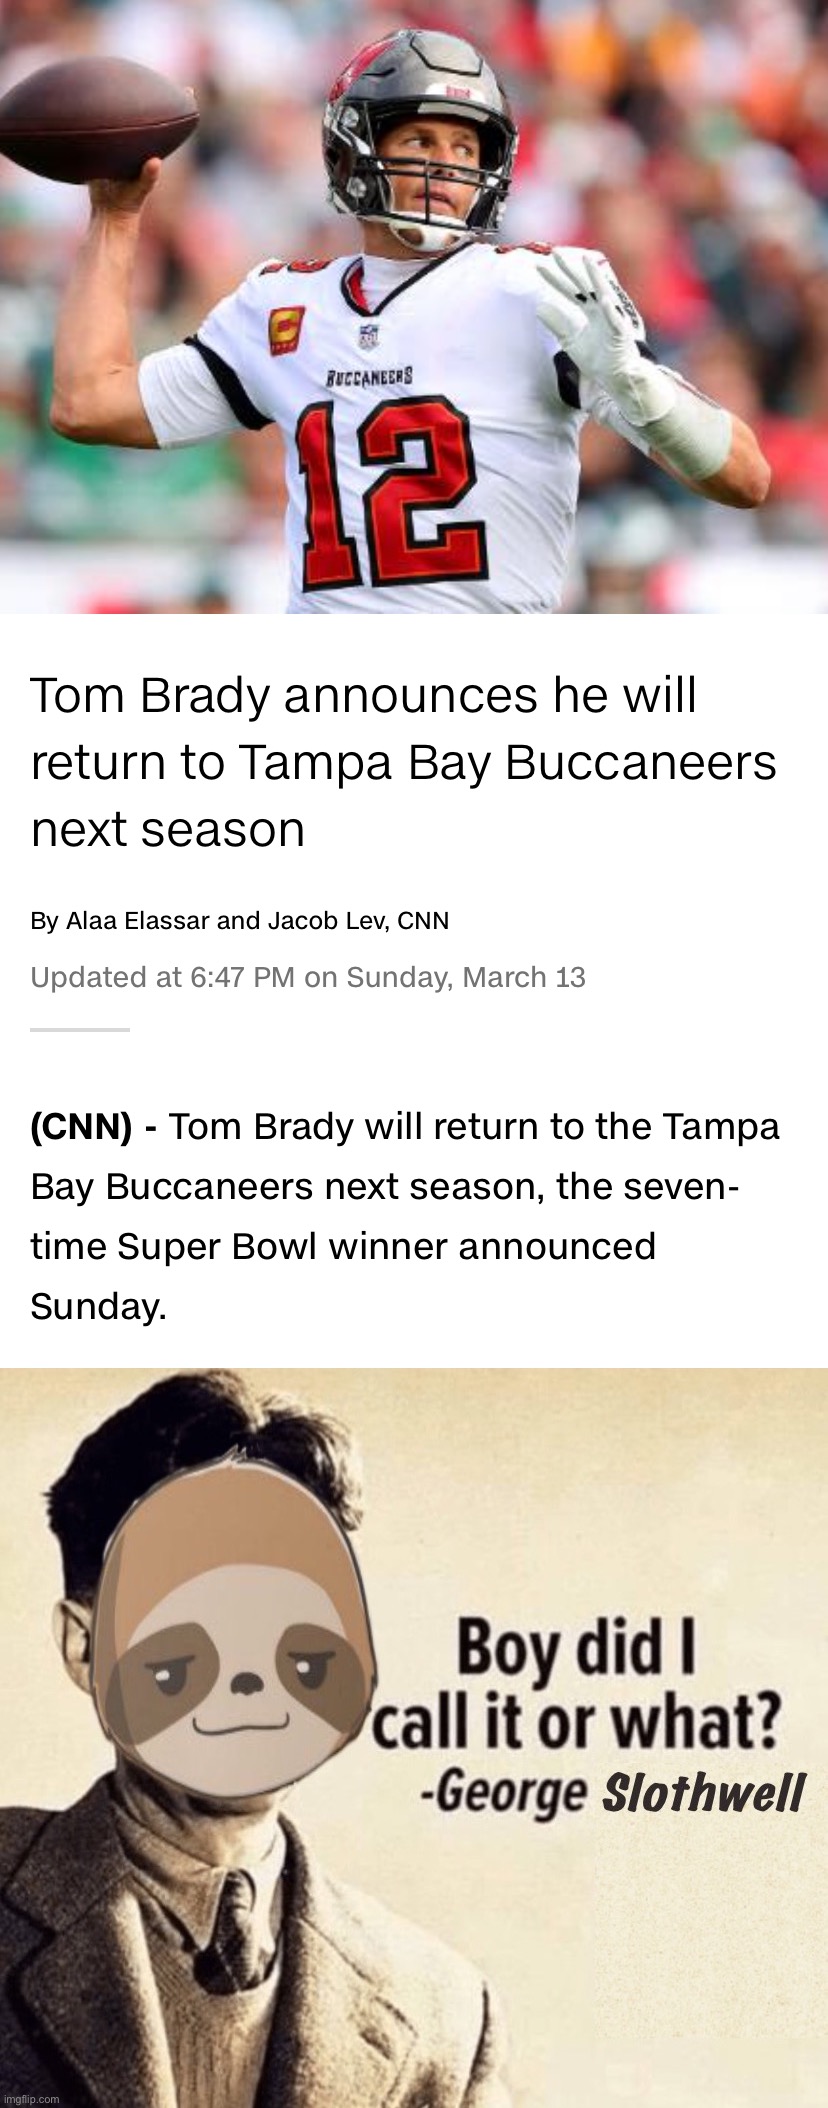 Clinton News Network reports Tom Brady is back. Awaiting confirmation from a trusted source like Beforeitsnews.com | image tagged in cnn fake news,cnn sucks,cnn crock news network,cnn crazy news network,cnn very fake news,cnn wolf of fake news fanfiction | made w/ Imgflip meme maker